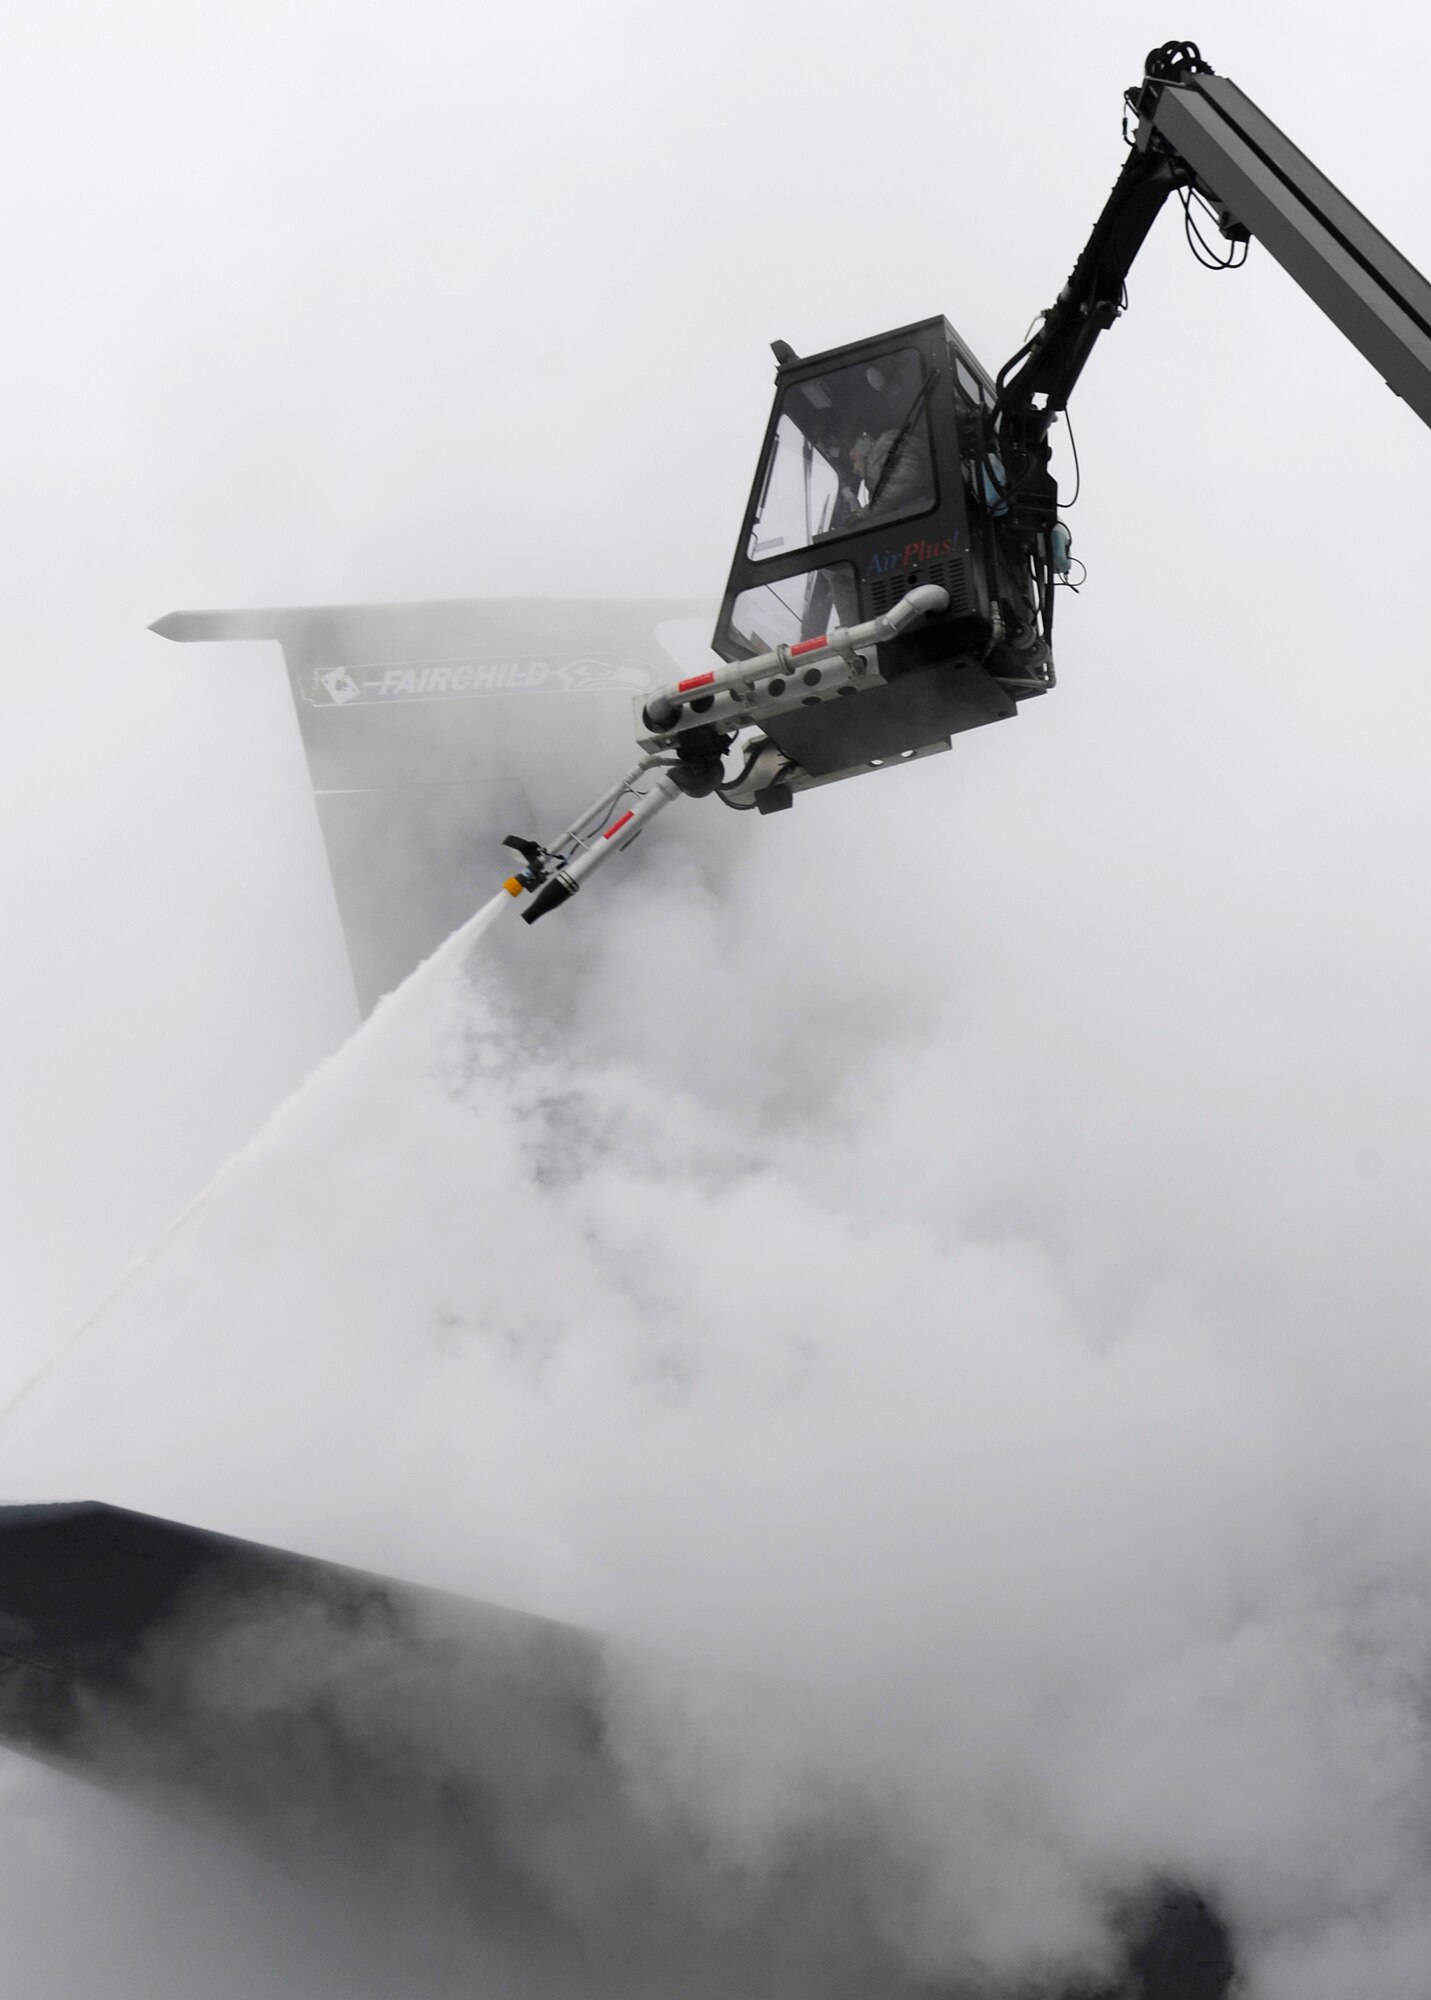 Staff Sgt. Aaron Wynhoff, 141st Aircraft Maintenance Squadron crew chief, sprays a KC-135 Stratotanker with de-icing fluid on the flight line at Fairchild Air Force Base, Wash., Jan. 24, 2013. The trucks used are capable of holding 1,640 gallons of de-icing fluid and 165 gallons of anti-ice. (U.S.  Air Force photo by Airman 1st Class Ryan Zeski)